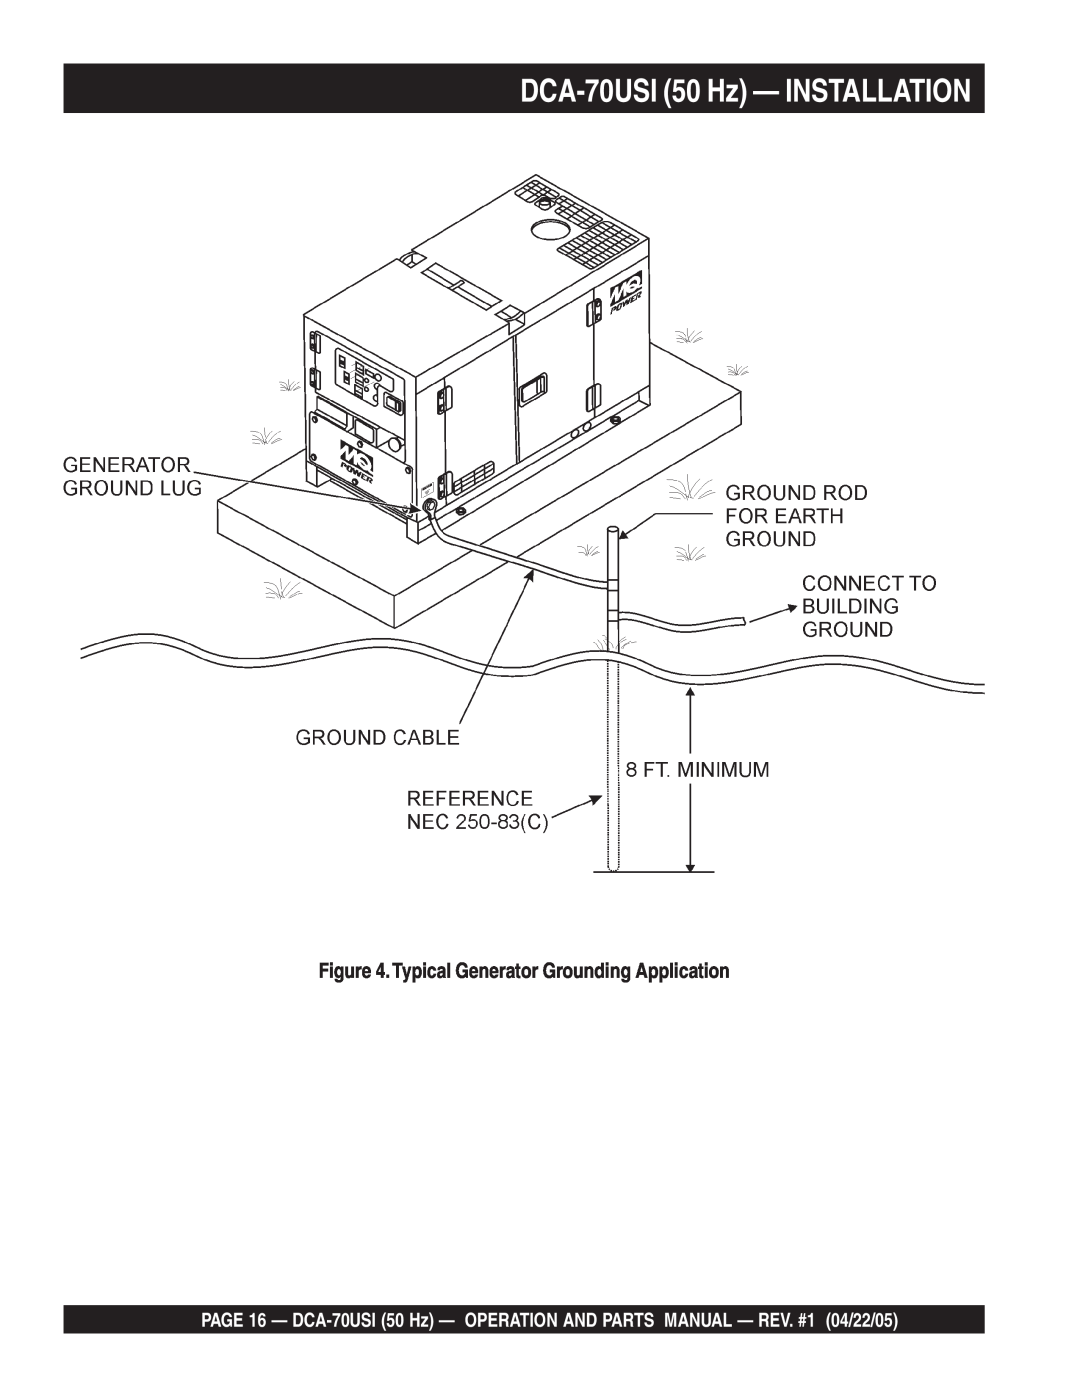 Multiquip operation manual DCA-70USI50 Hz — INSTALLATION, Typical Generator Grounding Application 